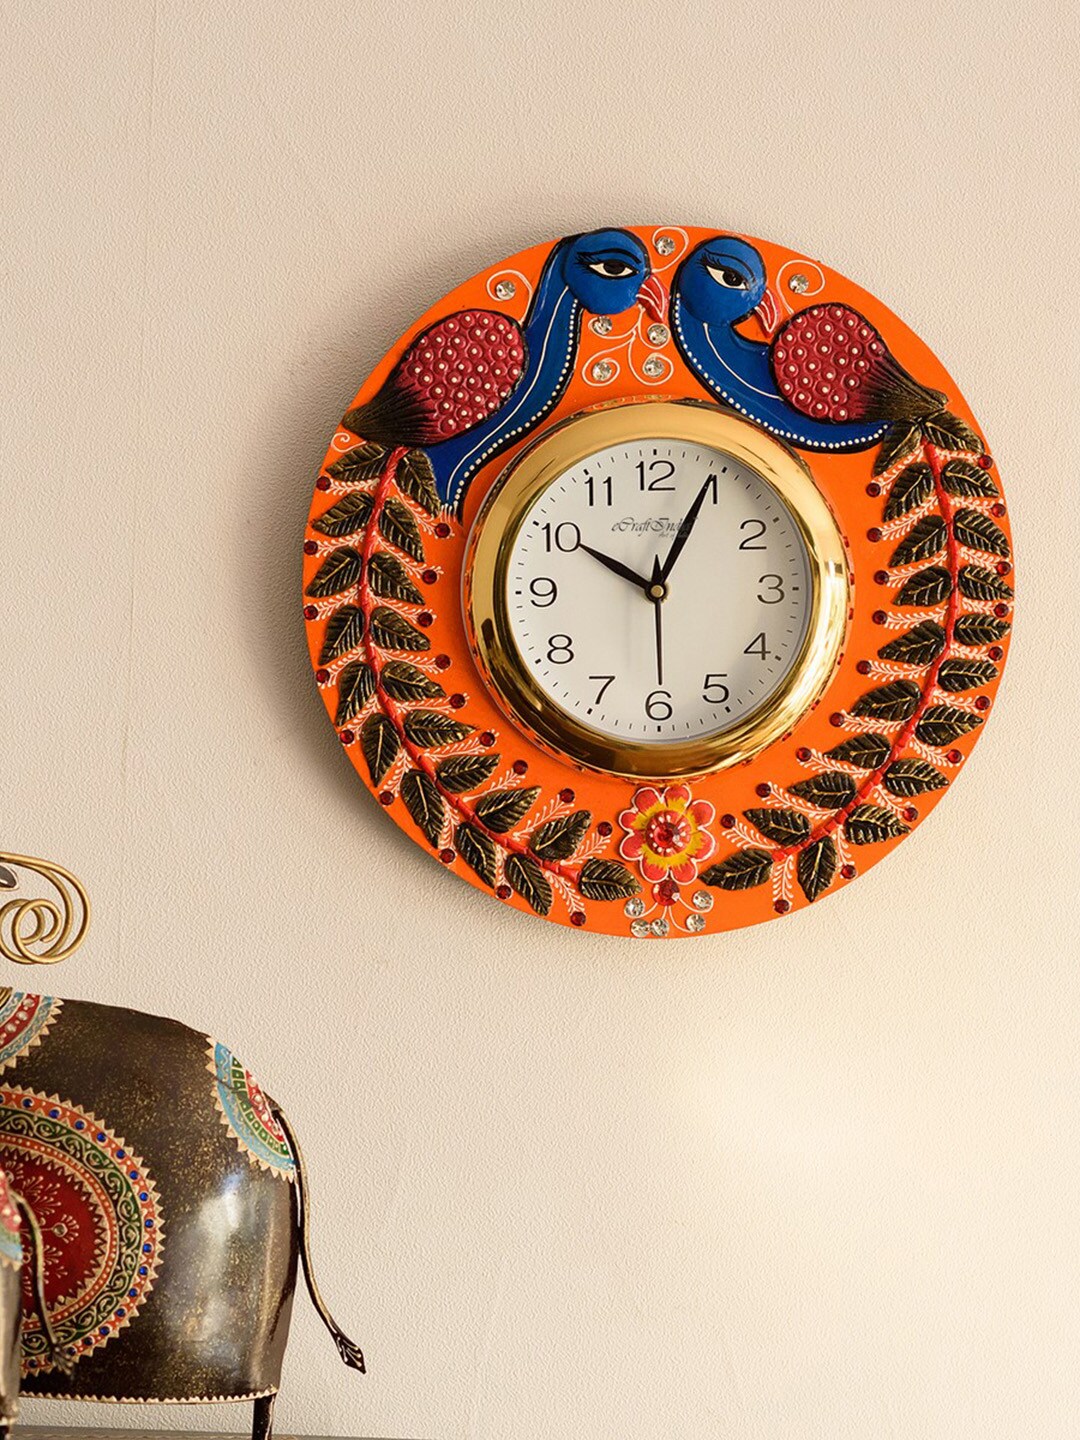 eCraftIndia Orange & Blue Handcrafted Round Textured Analogue Wall Clock Price in India